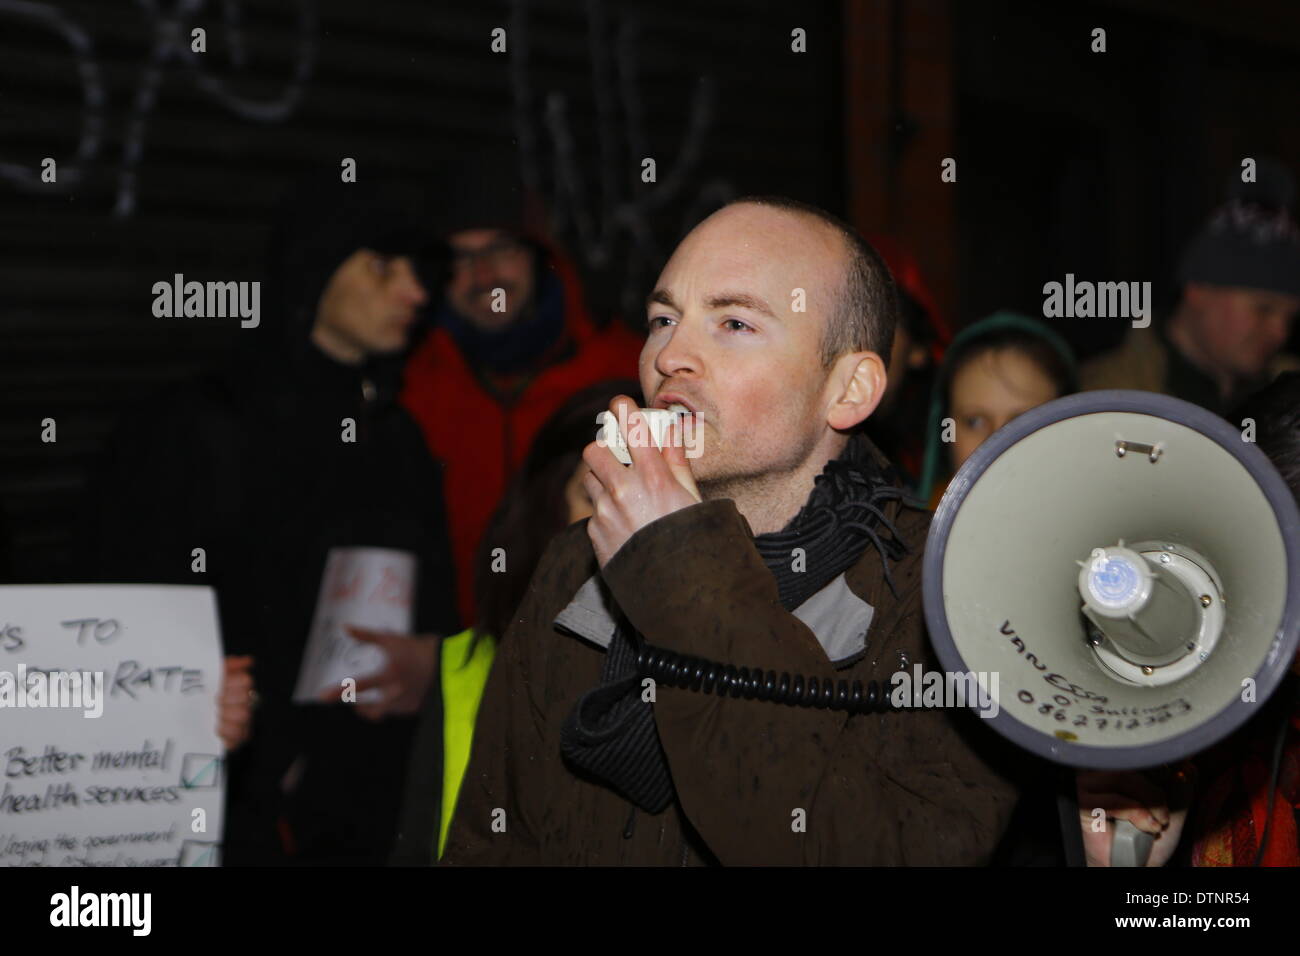 Dublin, Ireland. 21st February 2014. Socialist Party MEP Paul Murphy addresses the protest. Irish pro-choice activists protested outside the counselling offices of Good Counsel Network Ireland in Dublin. The offices are located directly next to a Marie Stopes Centre, which provides pro-choice pregnancy counselling services. Credit:  Michael Debets/Alamy Live News Stock Photo